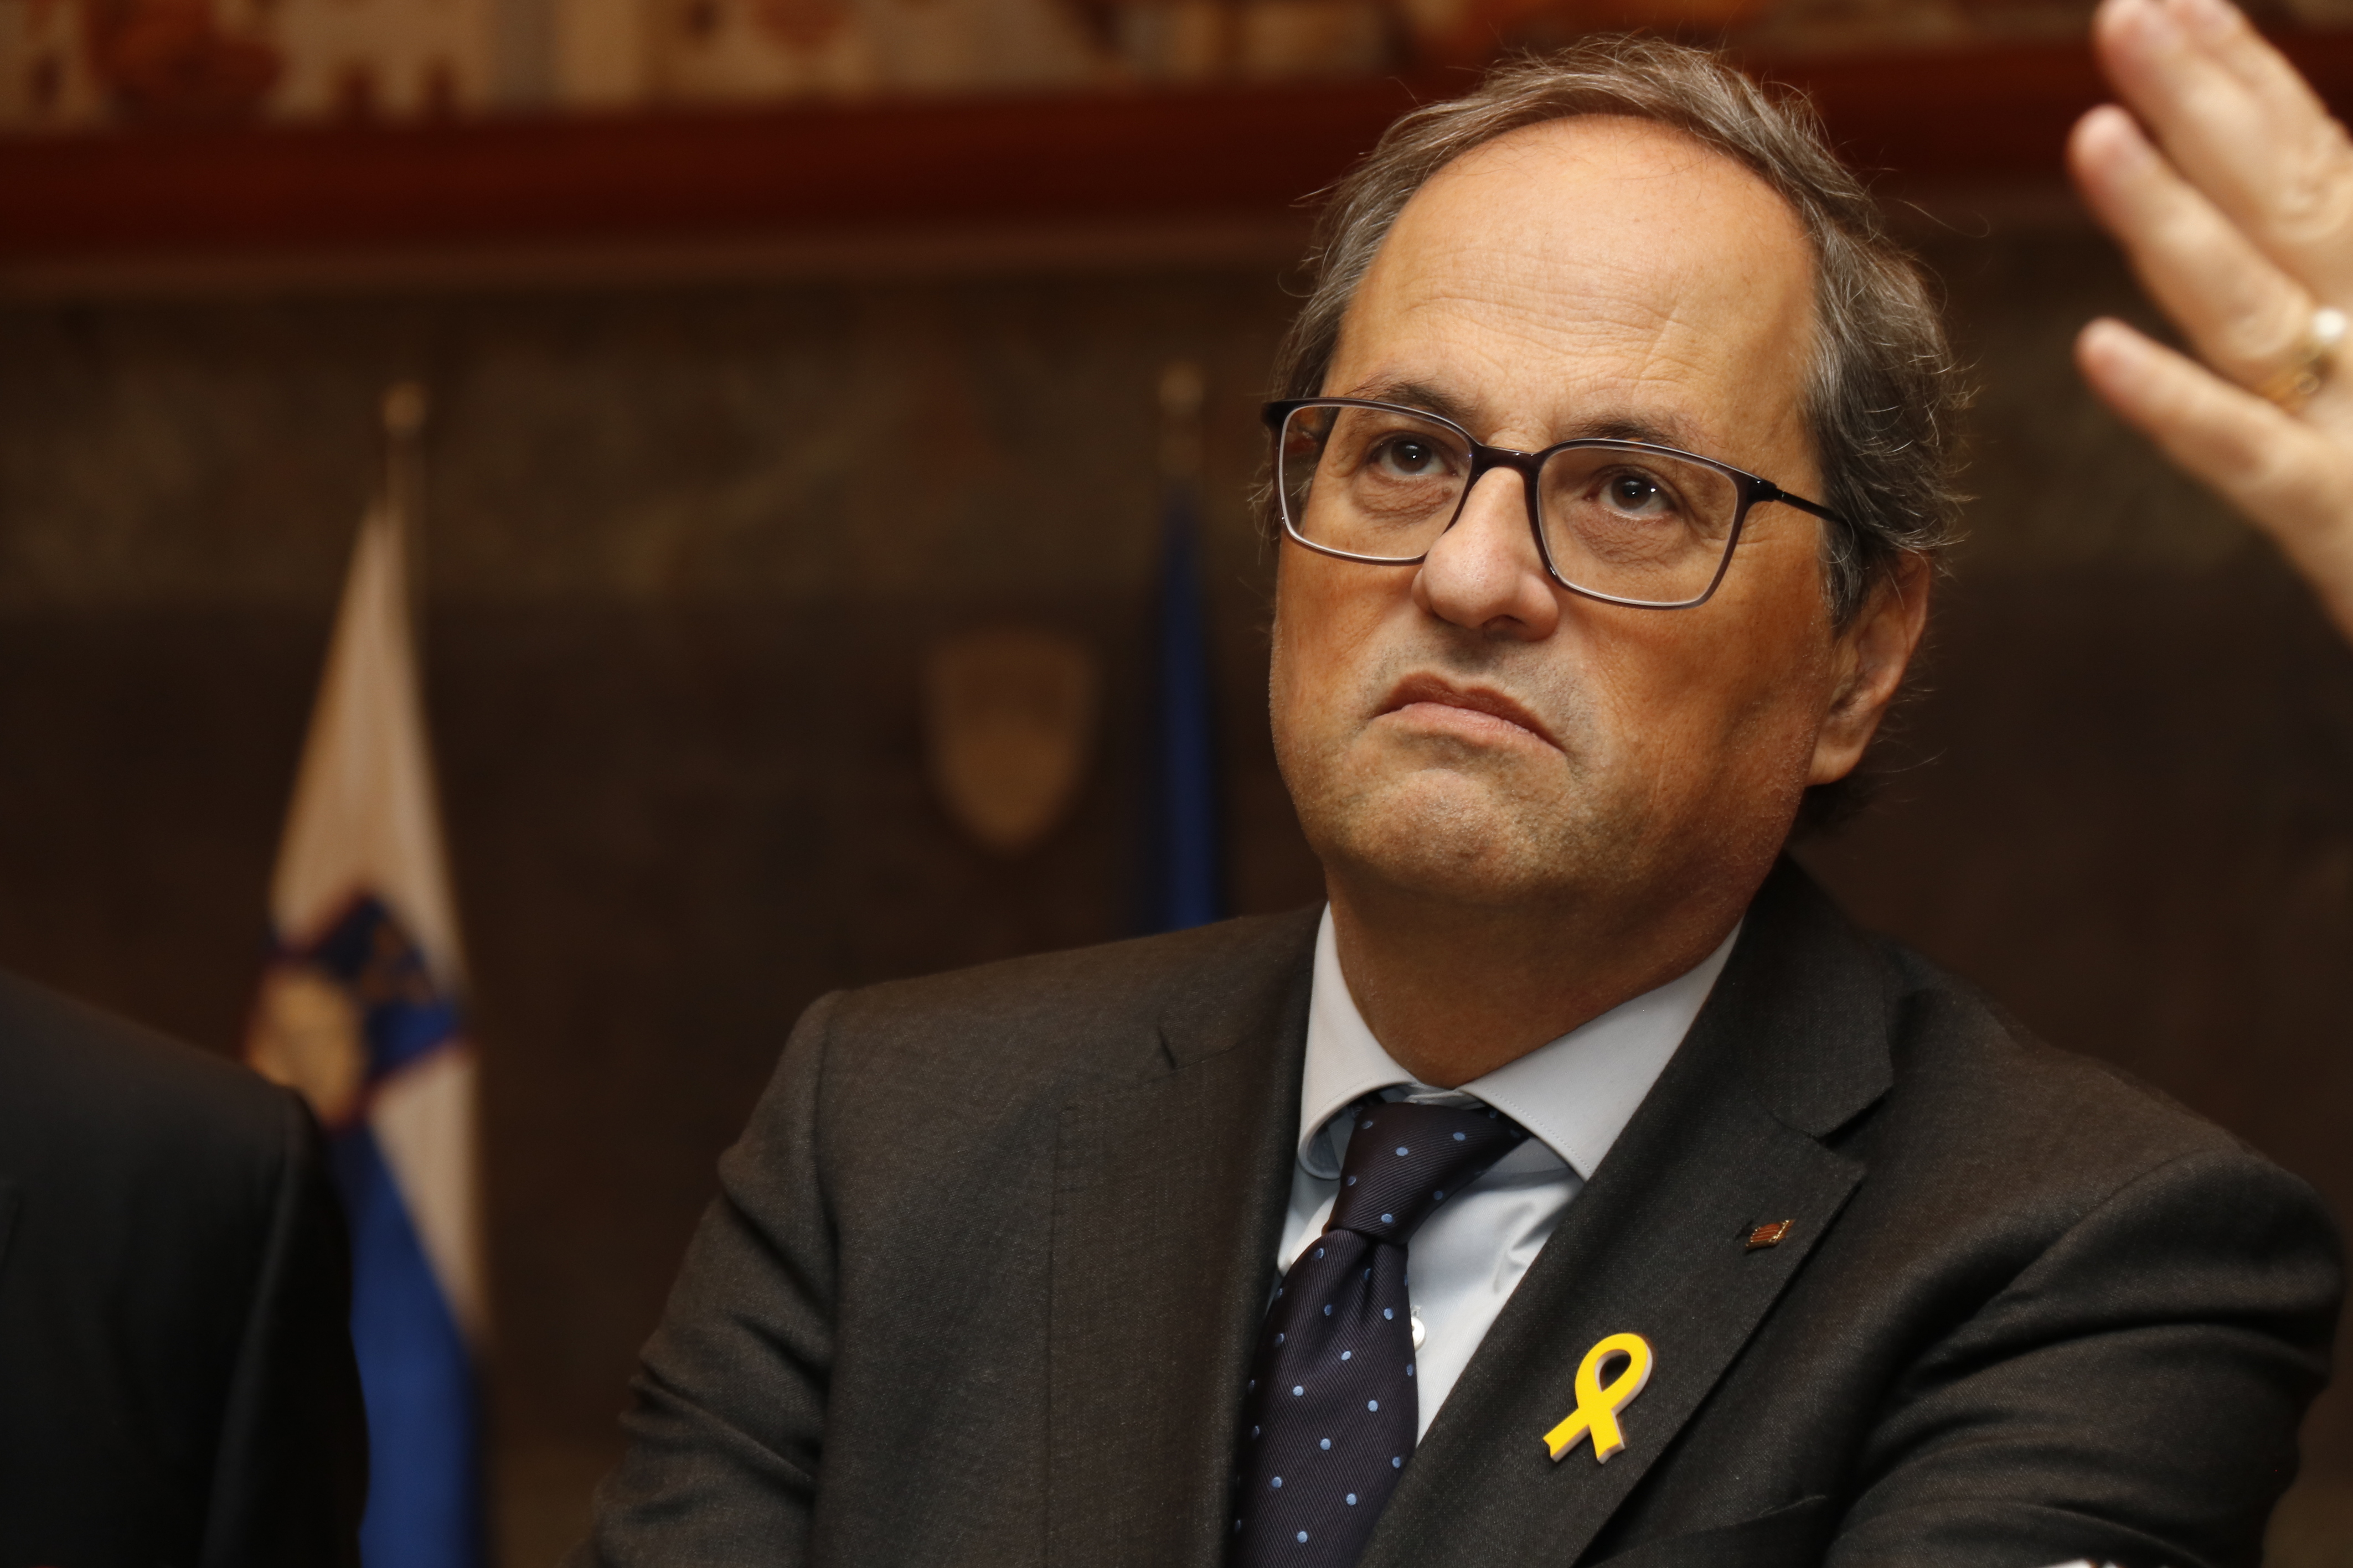 The Catalan president, Quim Torra, during his visit to Slovenia (by Blanca Blay)